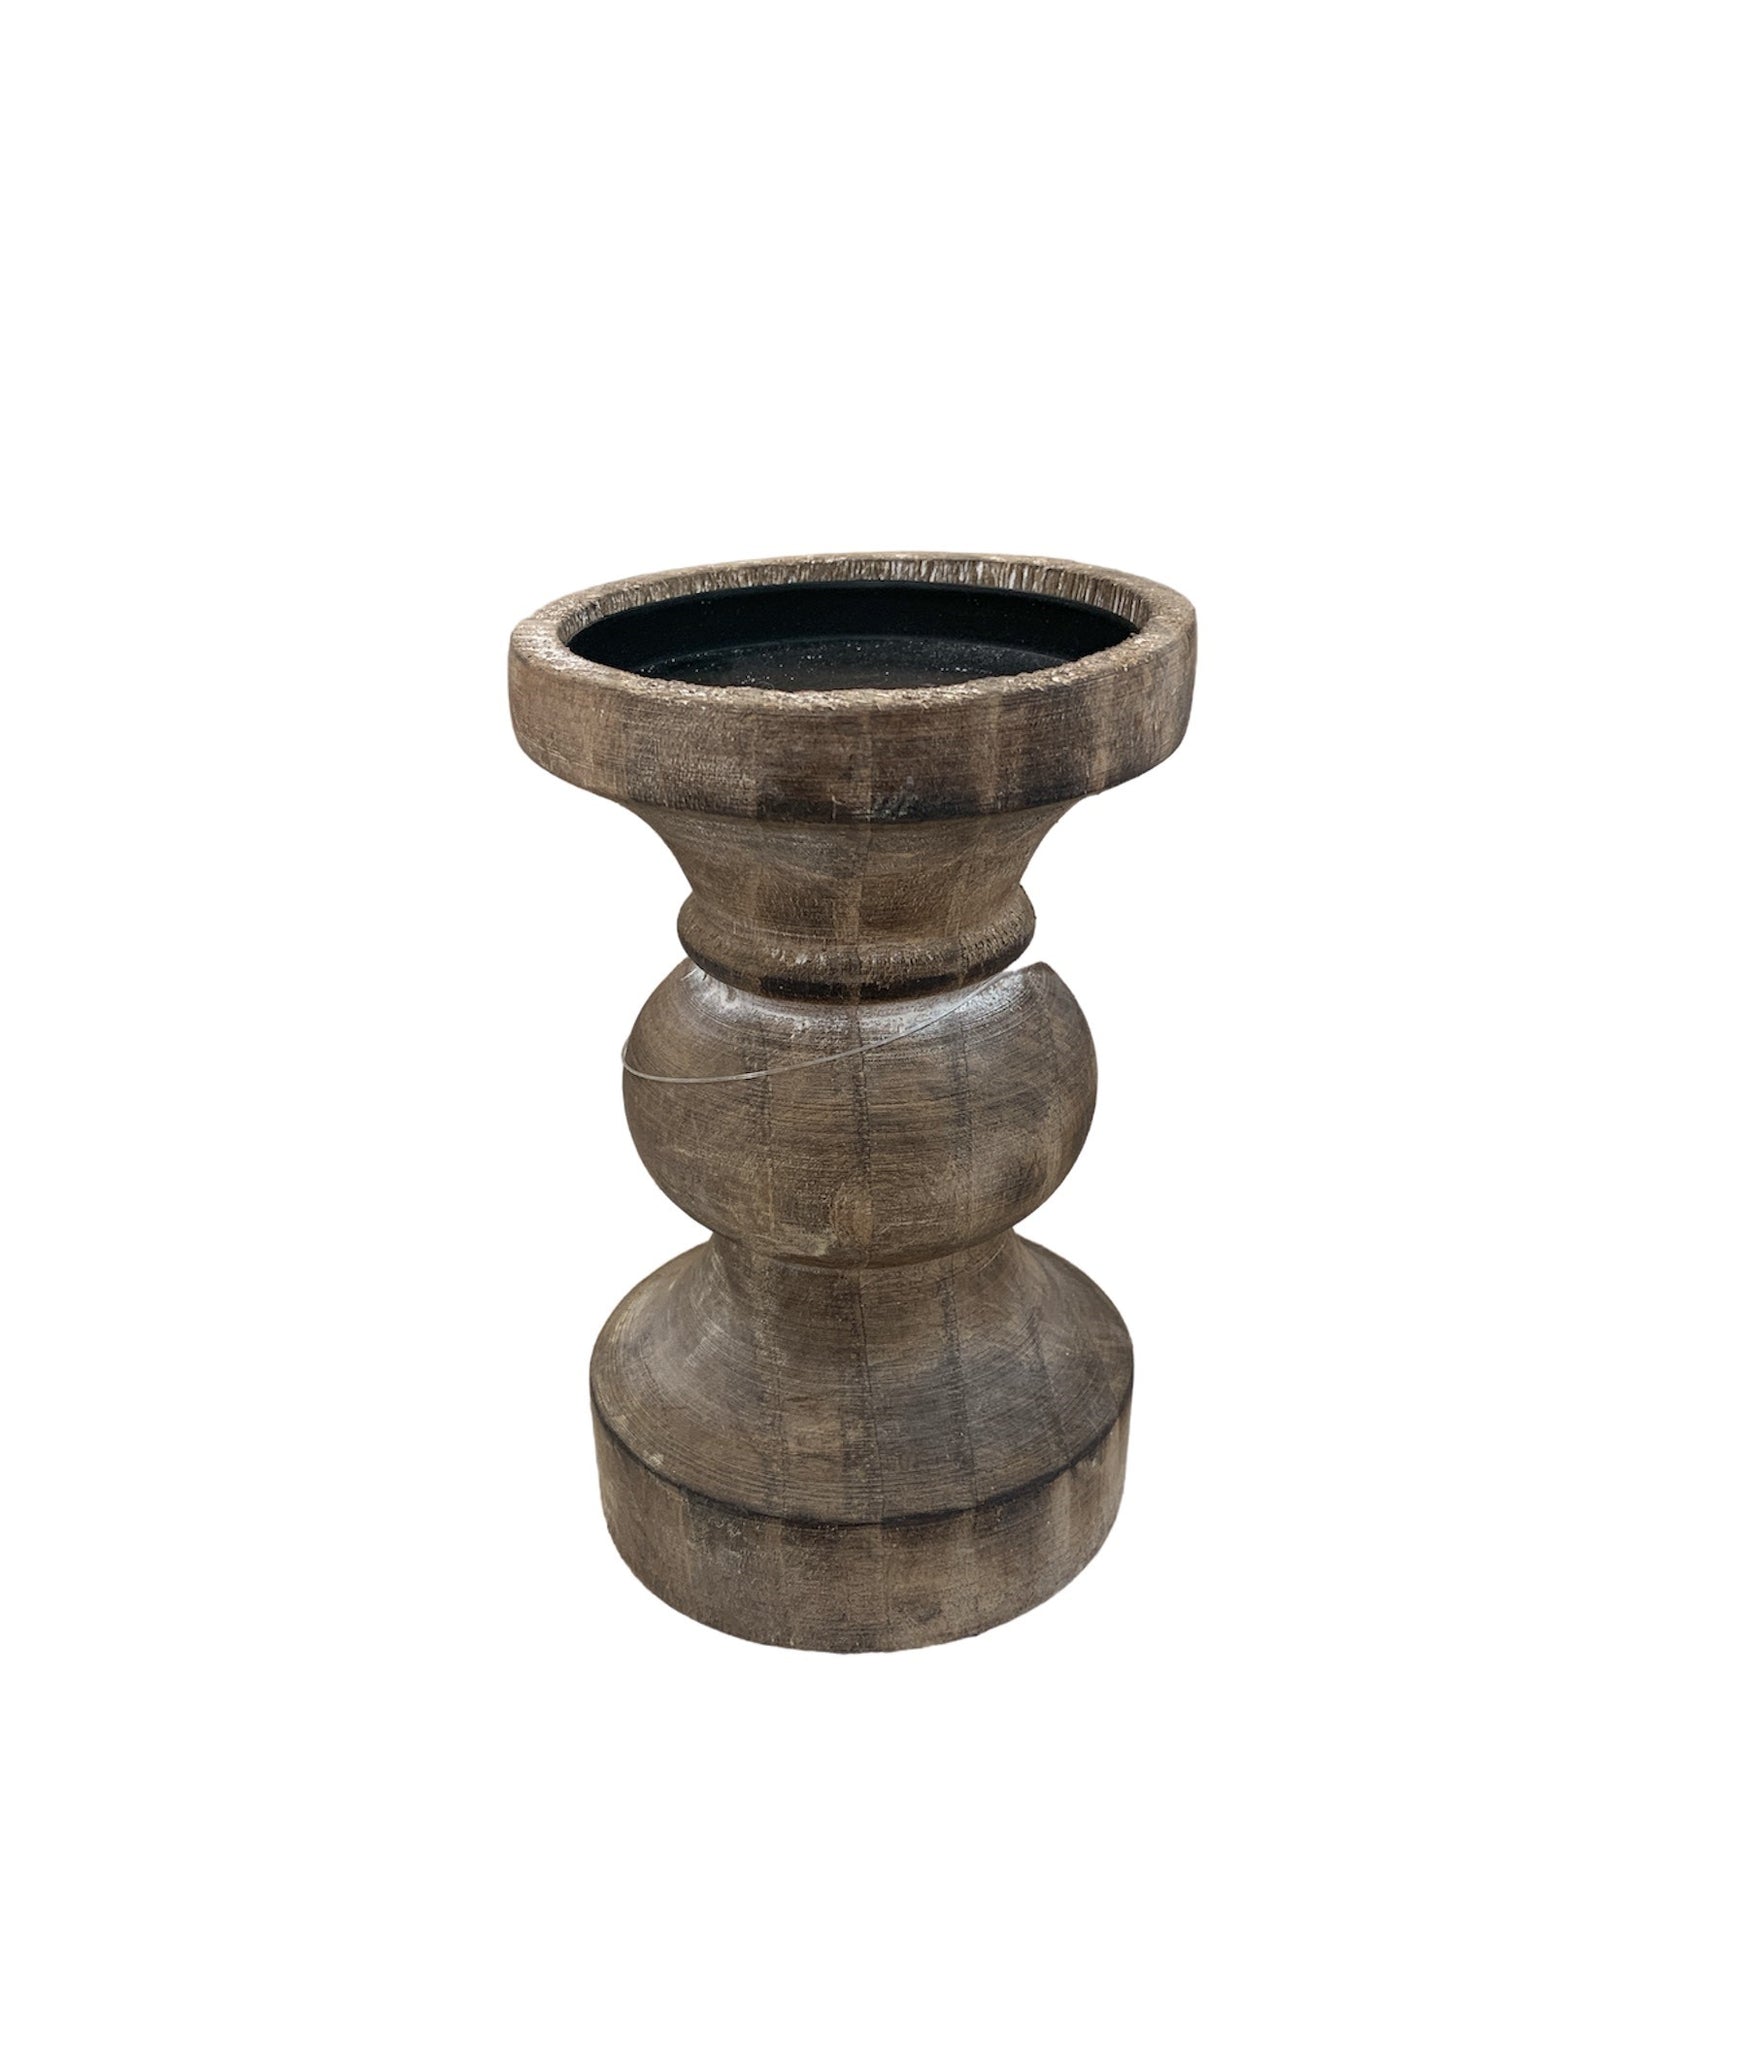 Everly Candle Holder